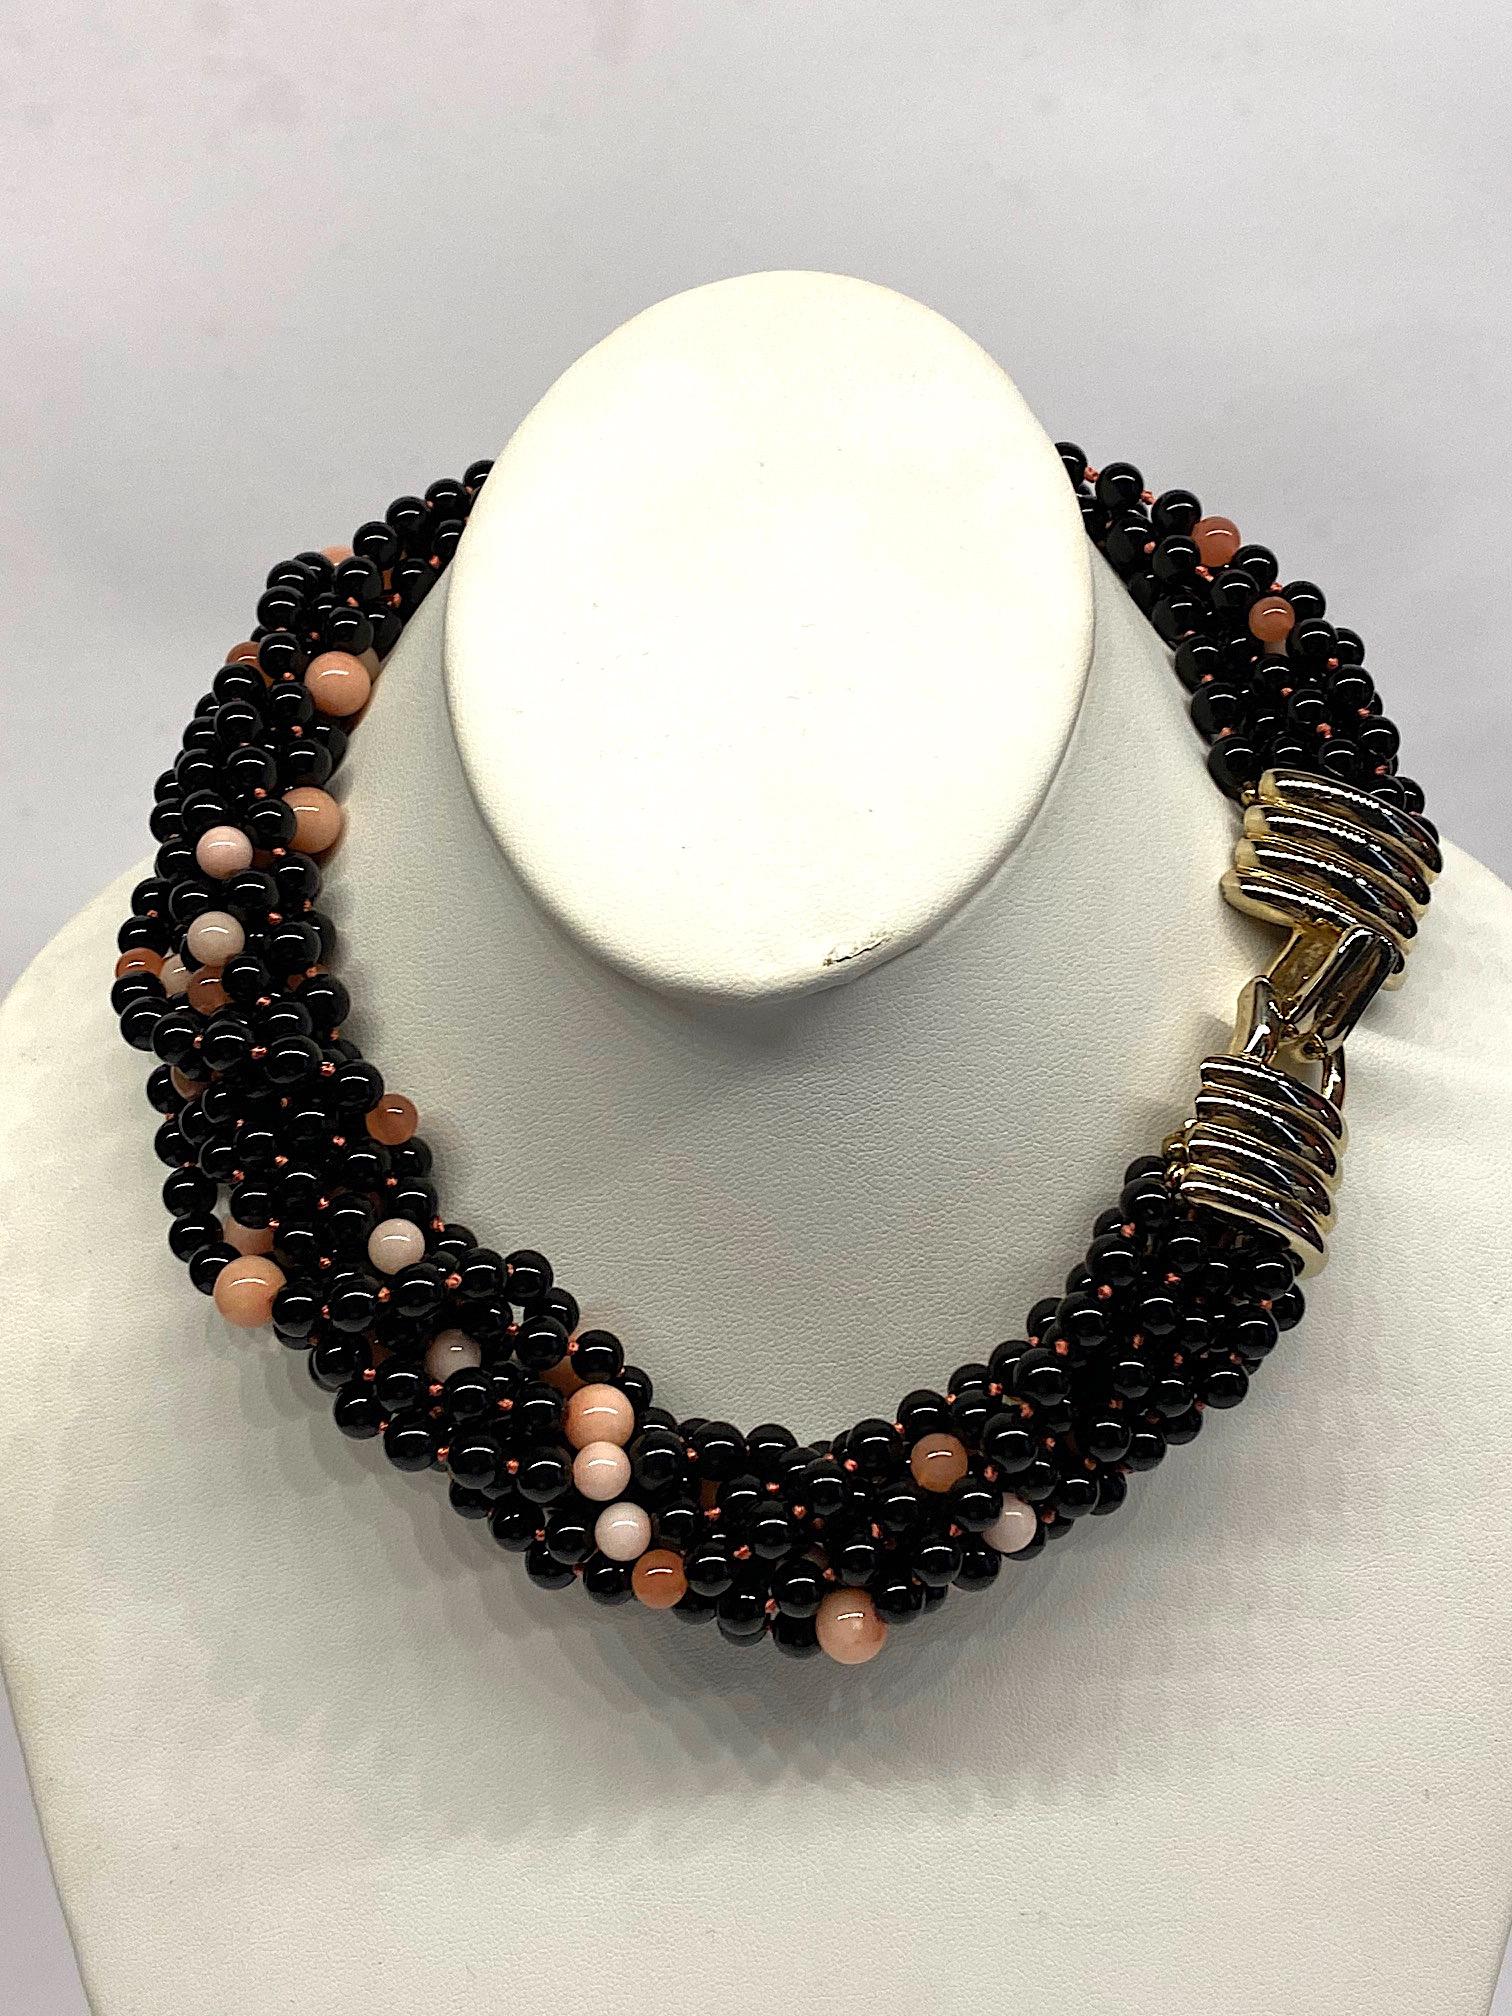 A wonderful 1980s ten strand necklace of black glass and natural rose quartz beads from fashion jewelry designer Donald Stannard. The black beads are 5.4 mm. The rose quartz are 5.2 and 6.8 mm in size. The beads are strand on matching rose color